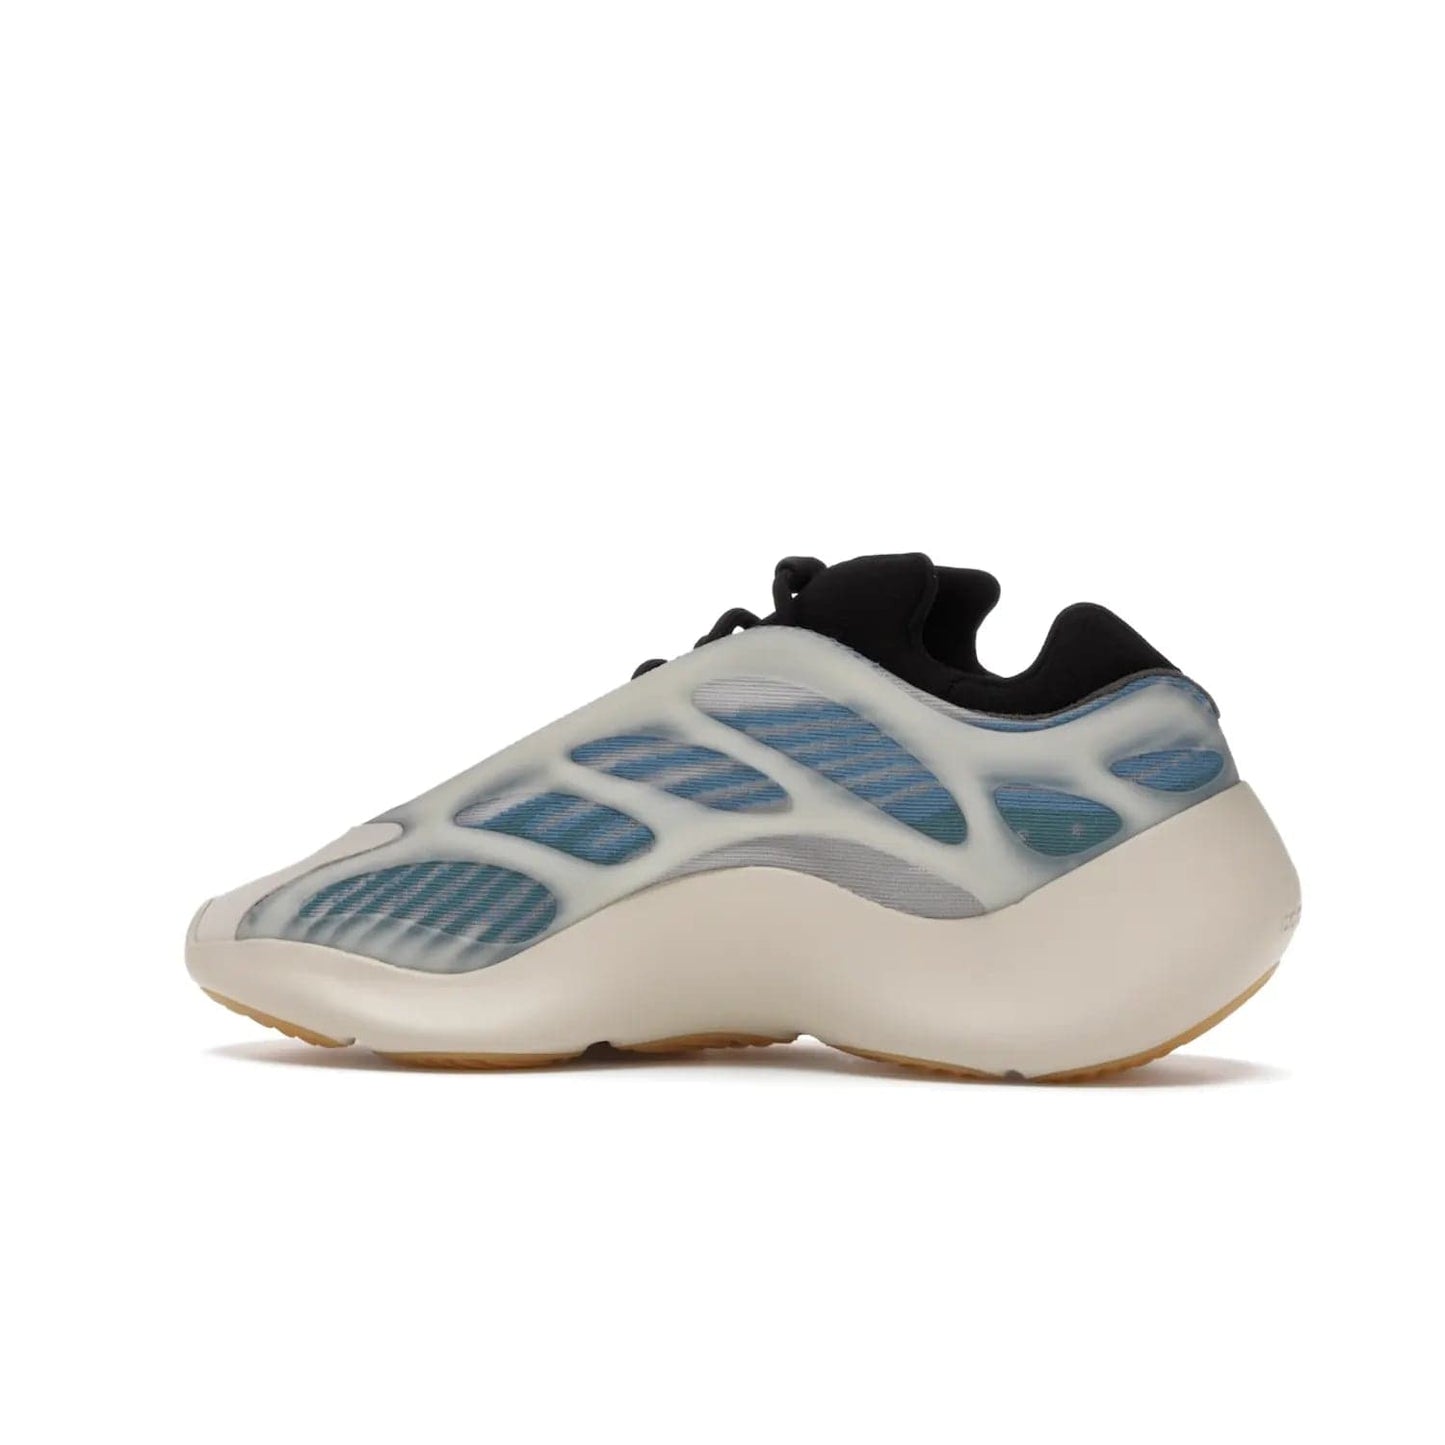 adidas Yeezy 700 V3 Kyanite - Image 21 - Only at www.BallersClubKickz.com - The adidas Yeezy 700 V3 Kyanite offers a layered design featuring a glow-in-the-dark TPU cage and a tonal cream-colored EVA foam midsole. With its herringbone-patterned outsole, the style and comfort of the sneaker will accompany you anywhere. Released in March 2021, it's a great addition to any sneaker wardrobe.